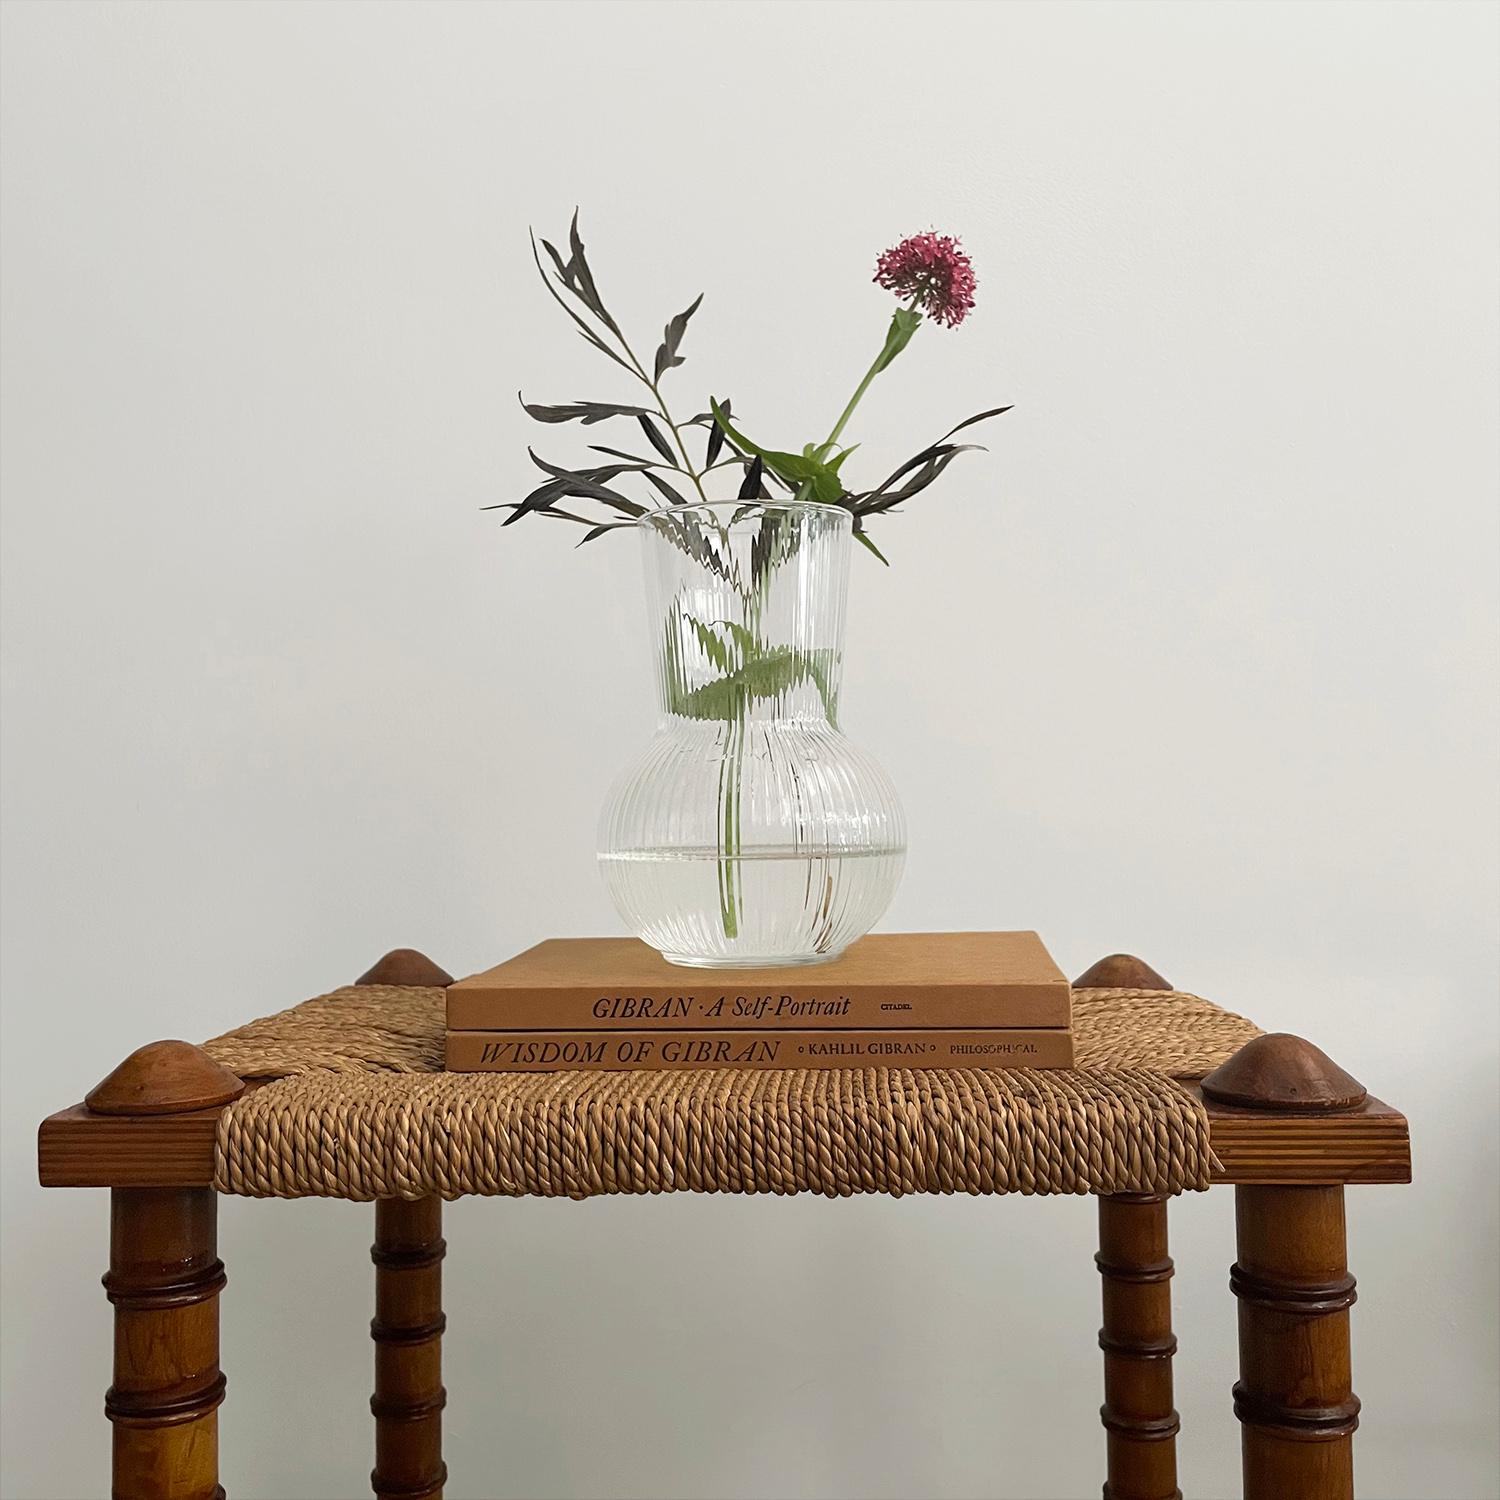 Pair of French arts & crafts end tables 
France, mid century 
Handcrafted artisanal tables 
These tables are charming and full of character 
Each table has four round wooden posts with fluted detailing and is finished with rounded wood caps Top